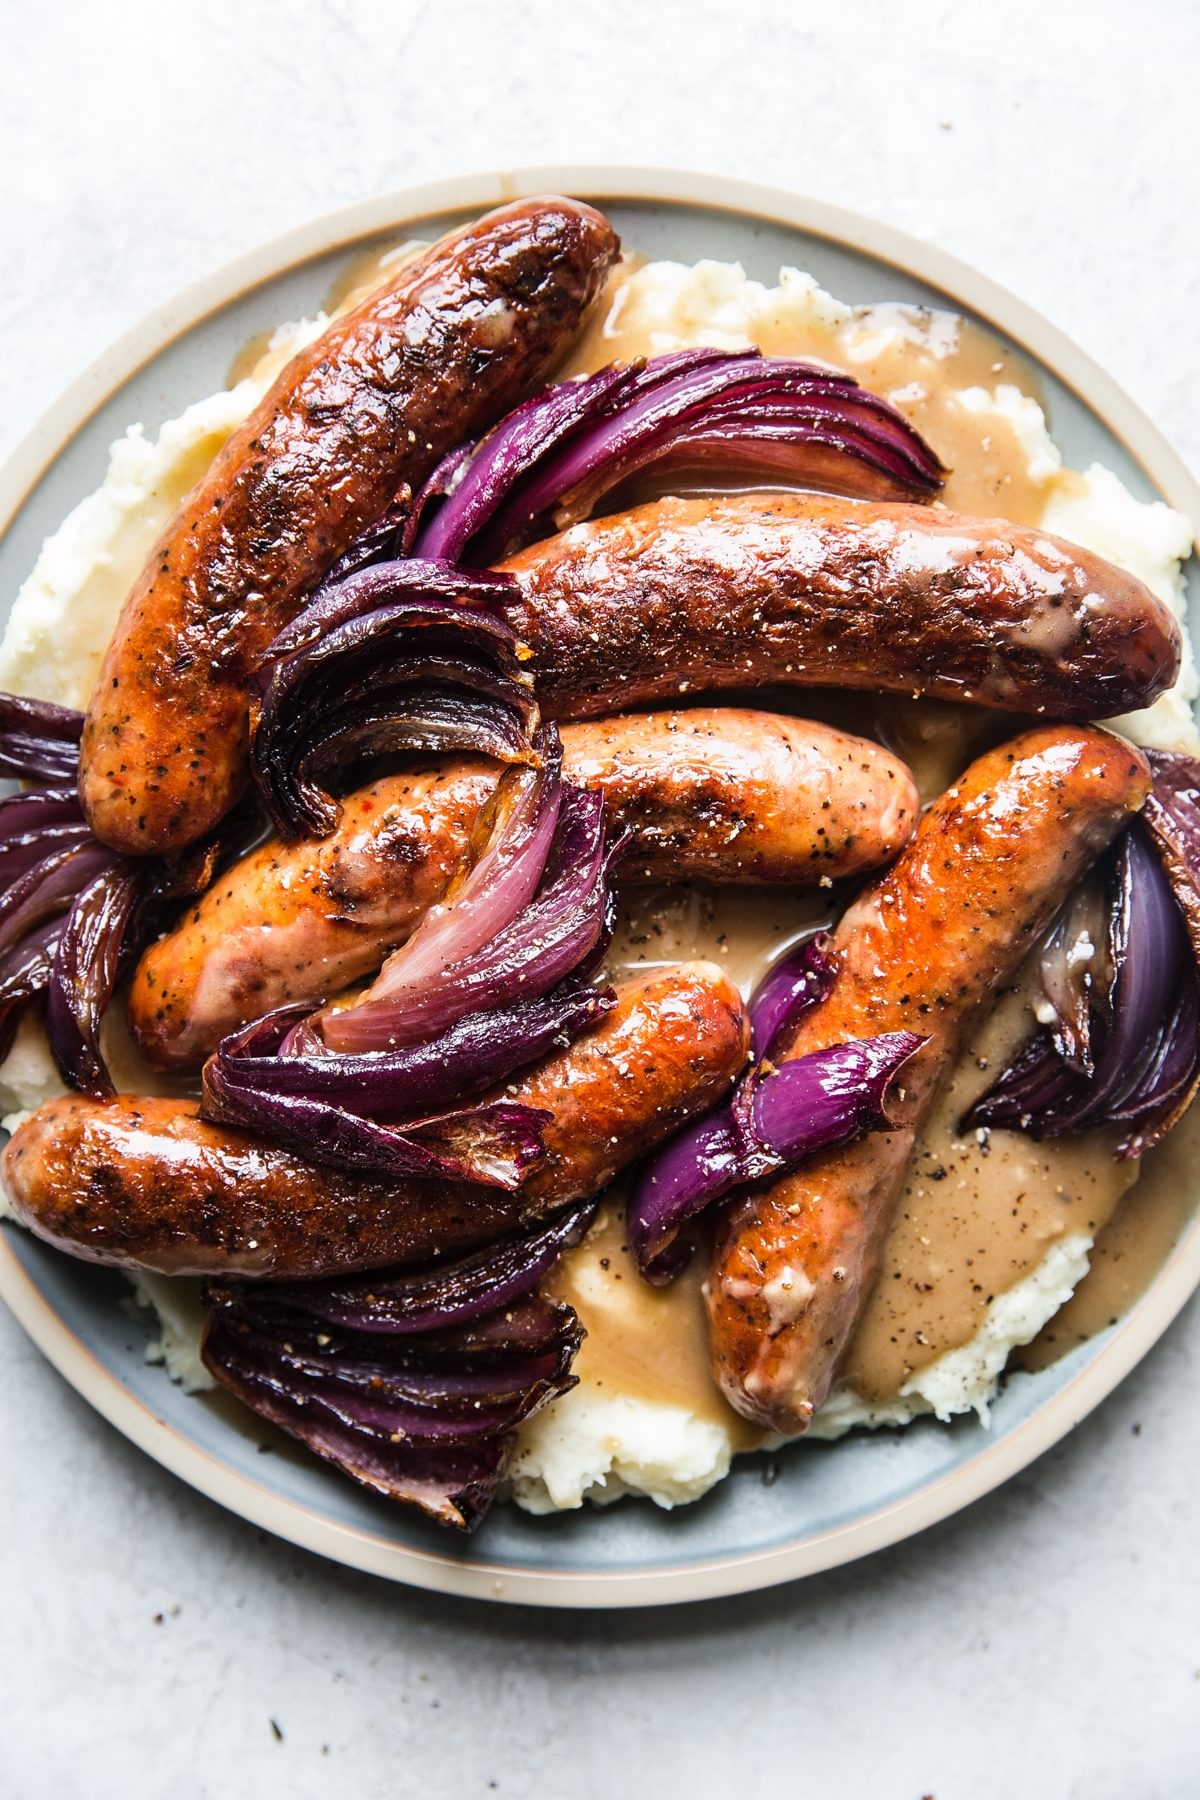 Bangers and mash with gravy and caramelized red onions on a plate